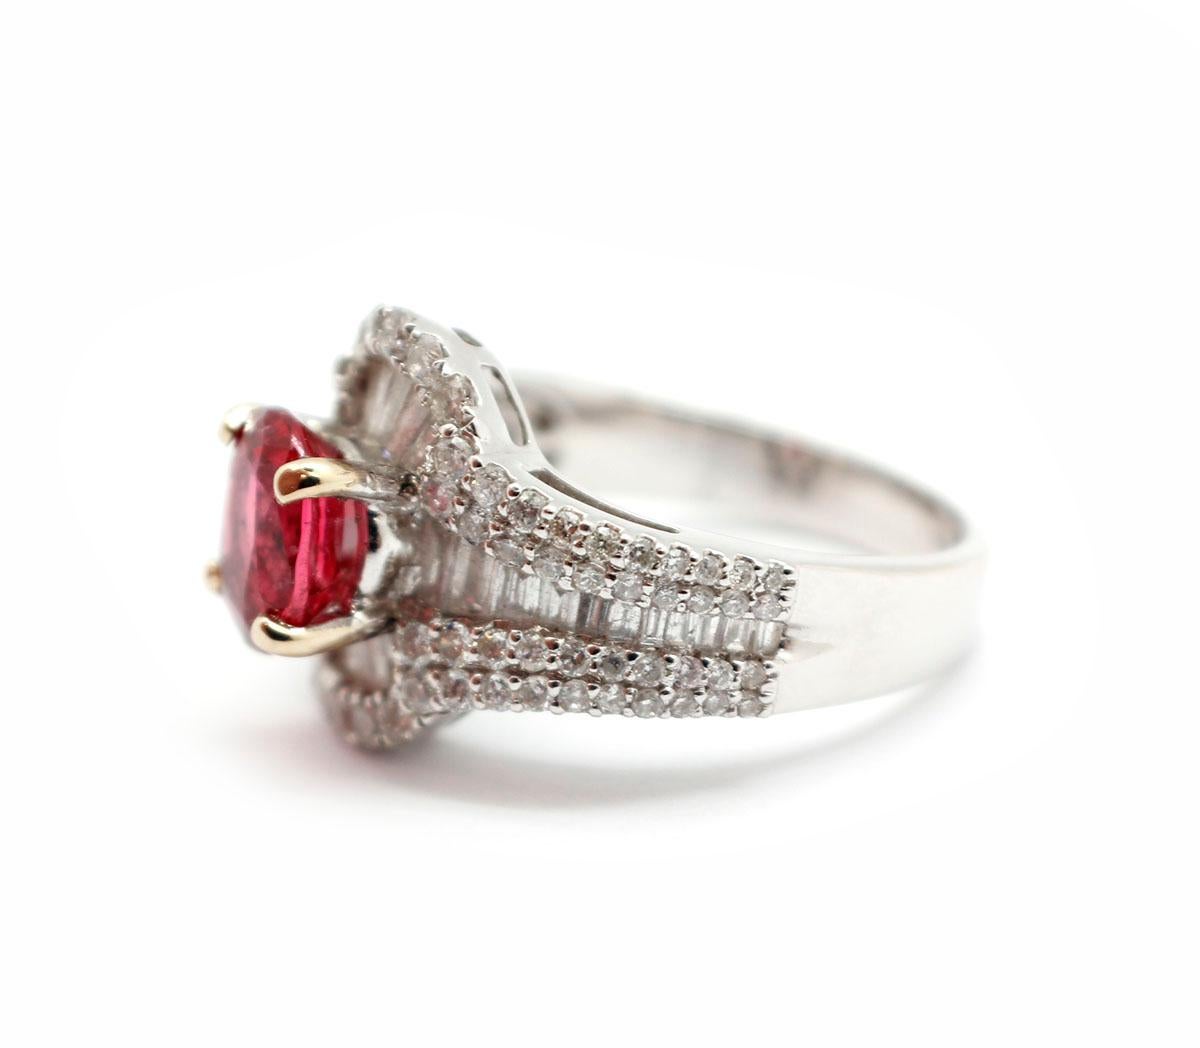 This ring is made in 14k white gold, and it holds a faceted, oval-cut red spinel at its center weighing 1.60ct. The spinel is accented by an additional 1.51 carats of diamonds for some more sparkle. The ring measures 14mm wide, and it weighs 6.3